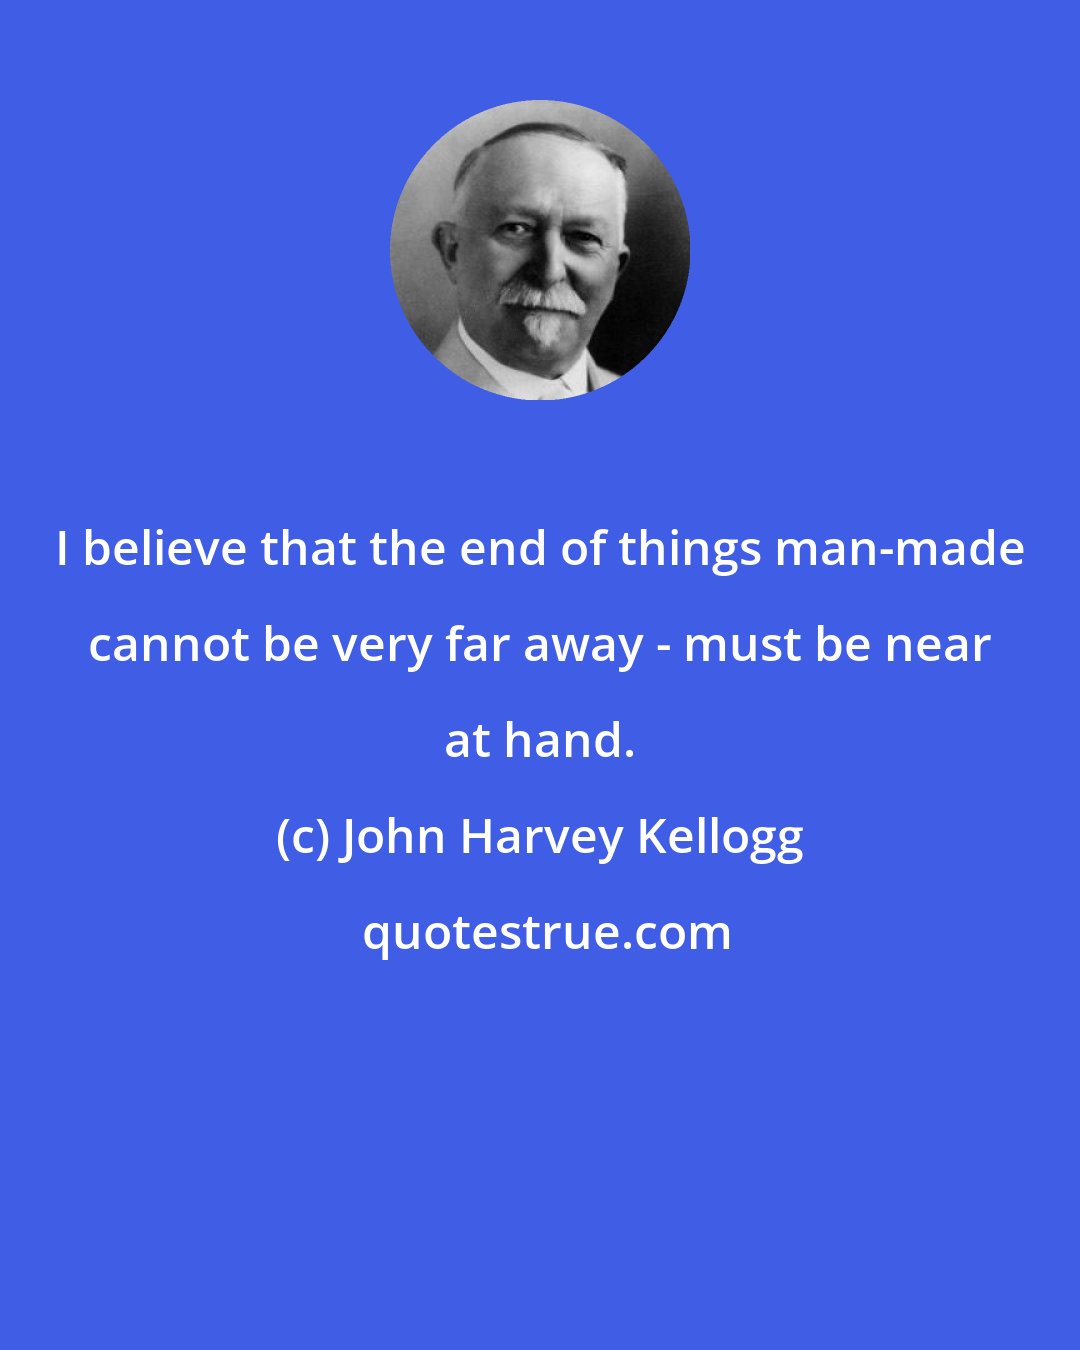 John Harvey Kellogg: I believe that the end of things man-made cannot be very far away - must be near at hand.